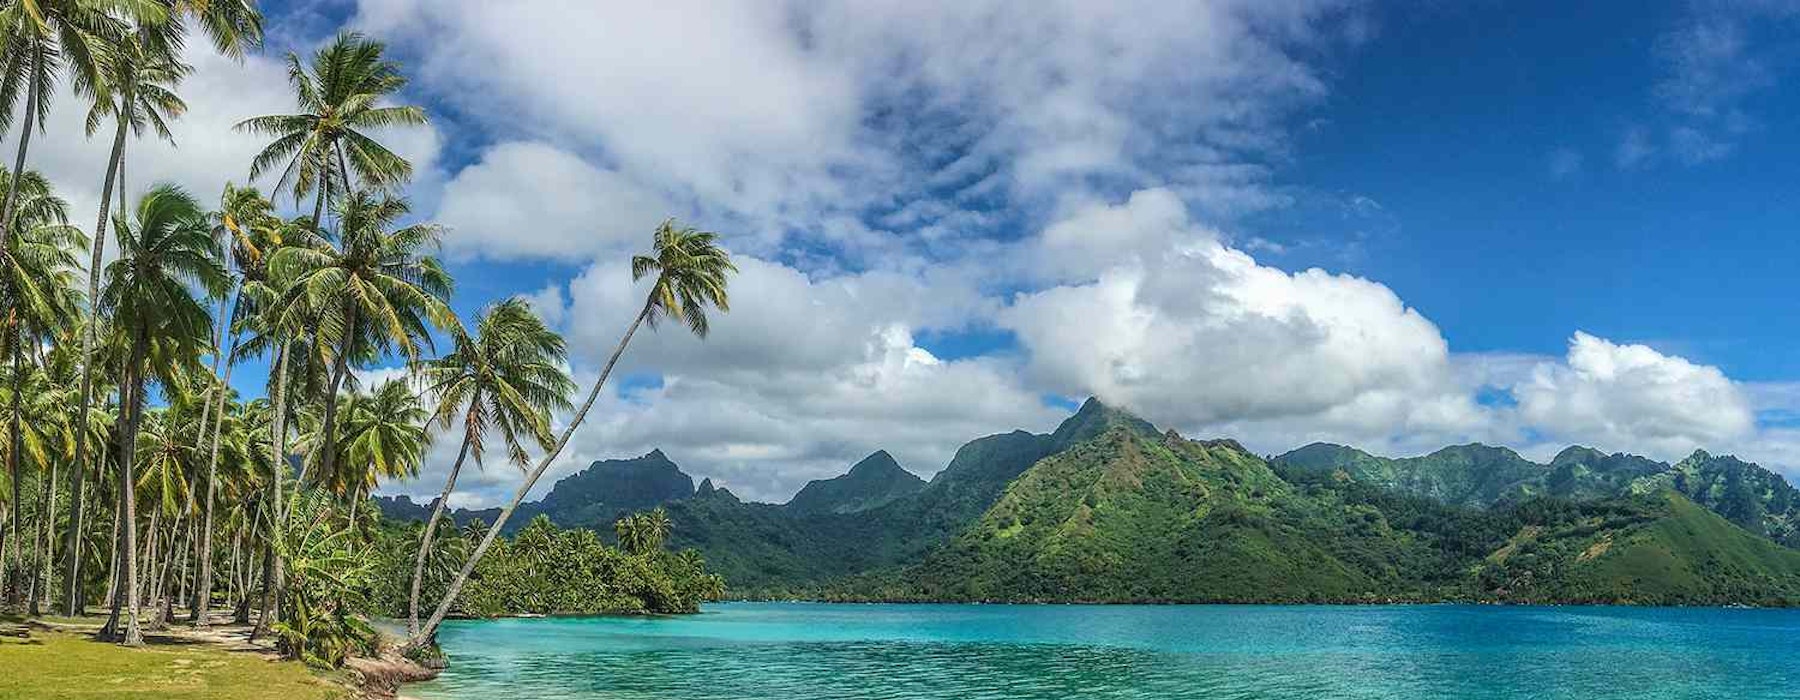 Yacht rentals in French Polynesia offer quite the escape